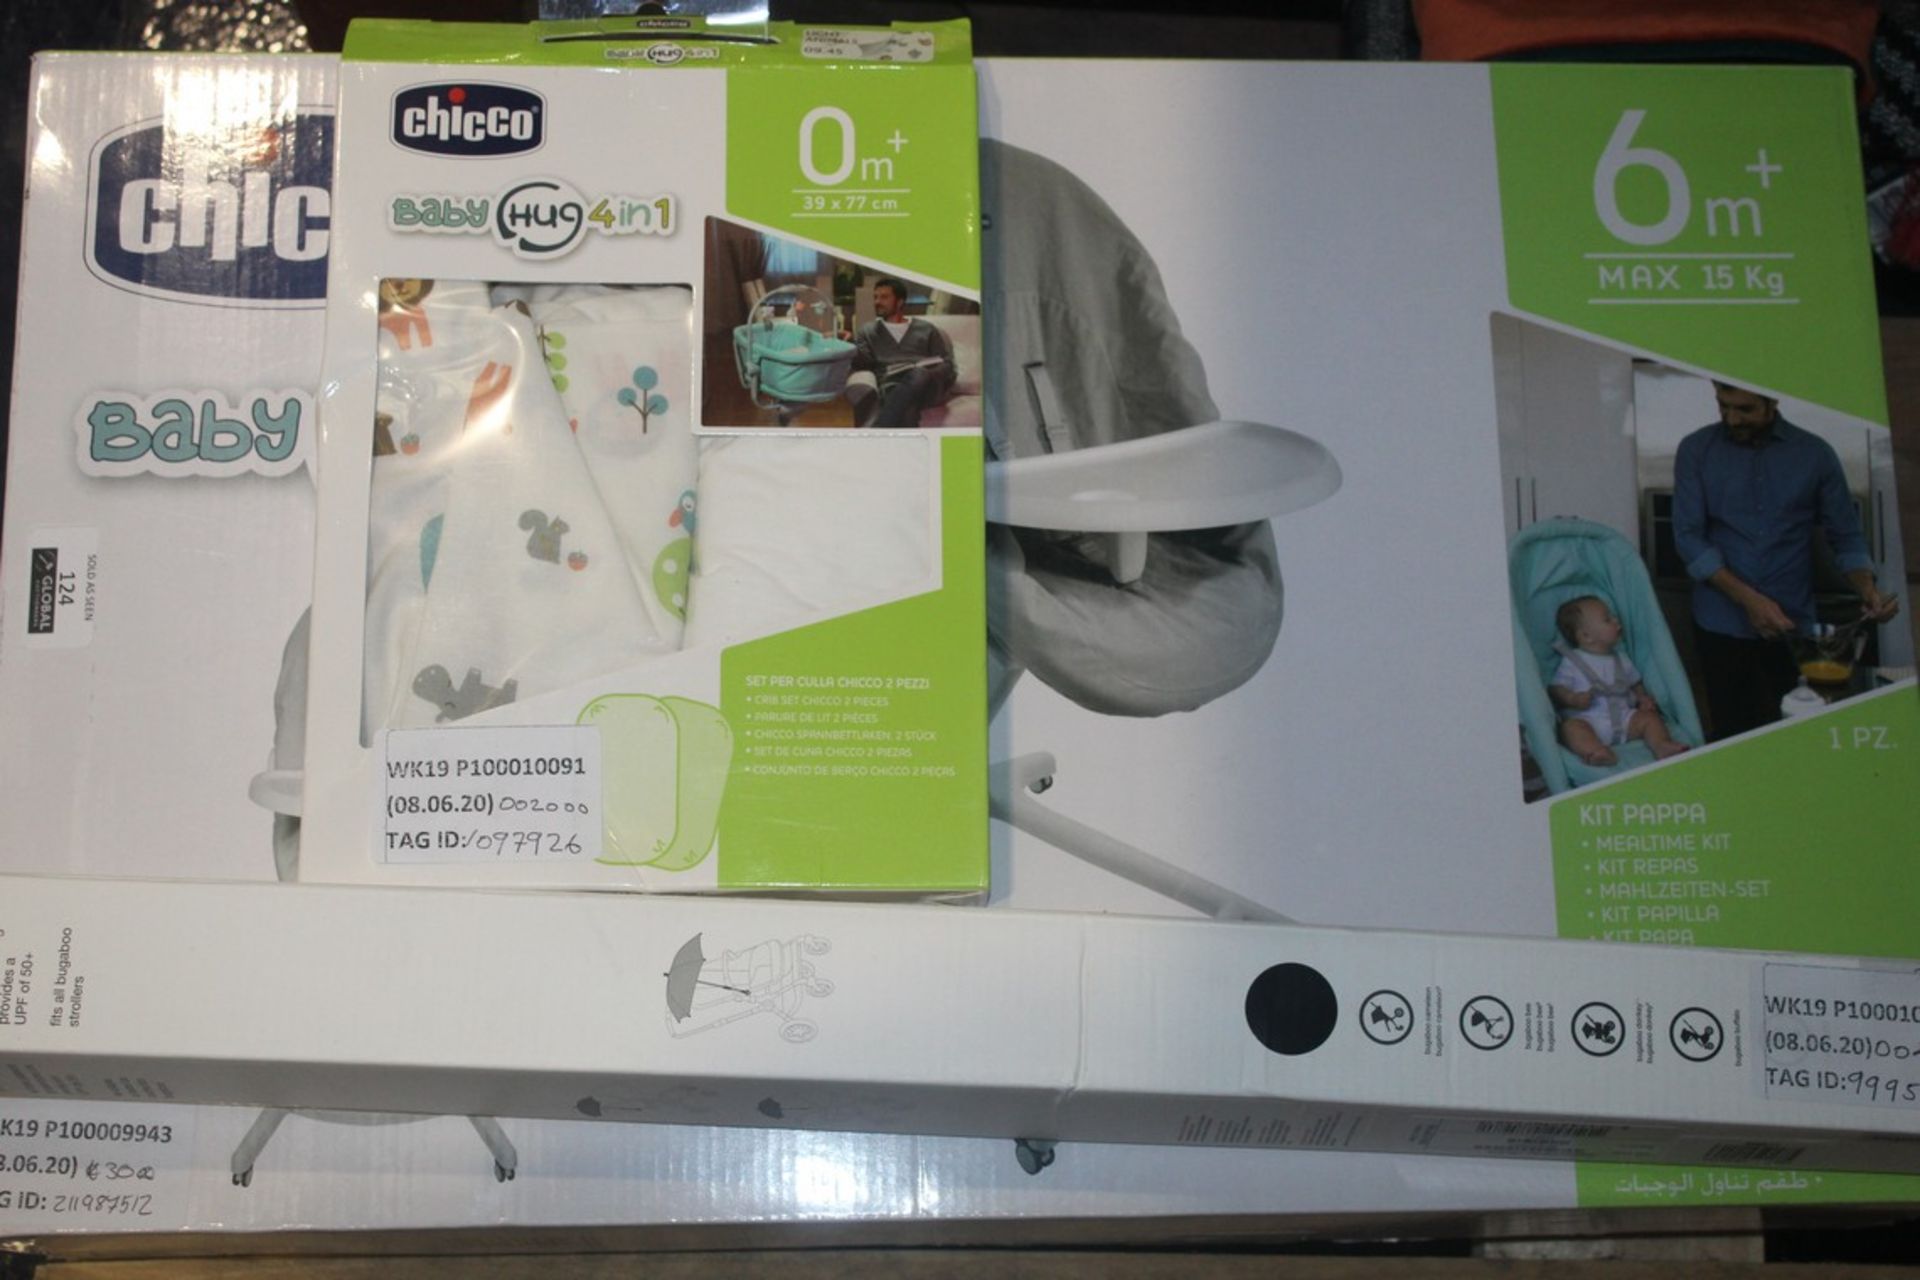 Assorted Items to Include a Bugaboo Parasol, A Chicco Hug 4-in-1 Sheet and Chicco Baby Hug 4-in-1